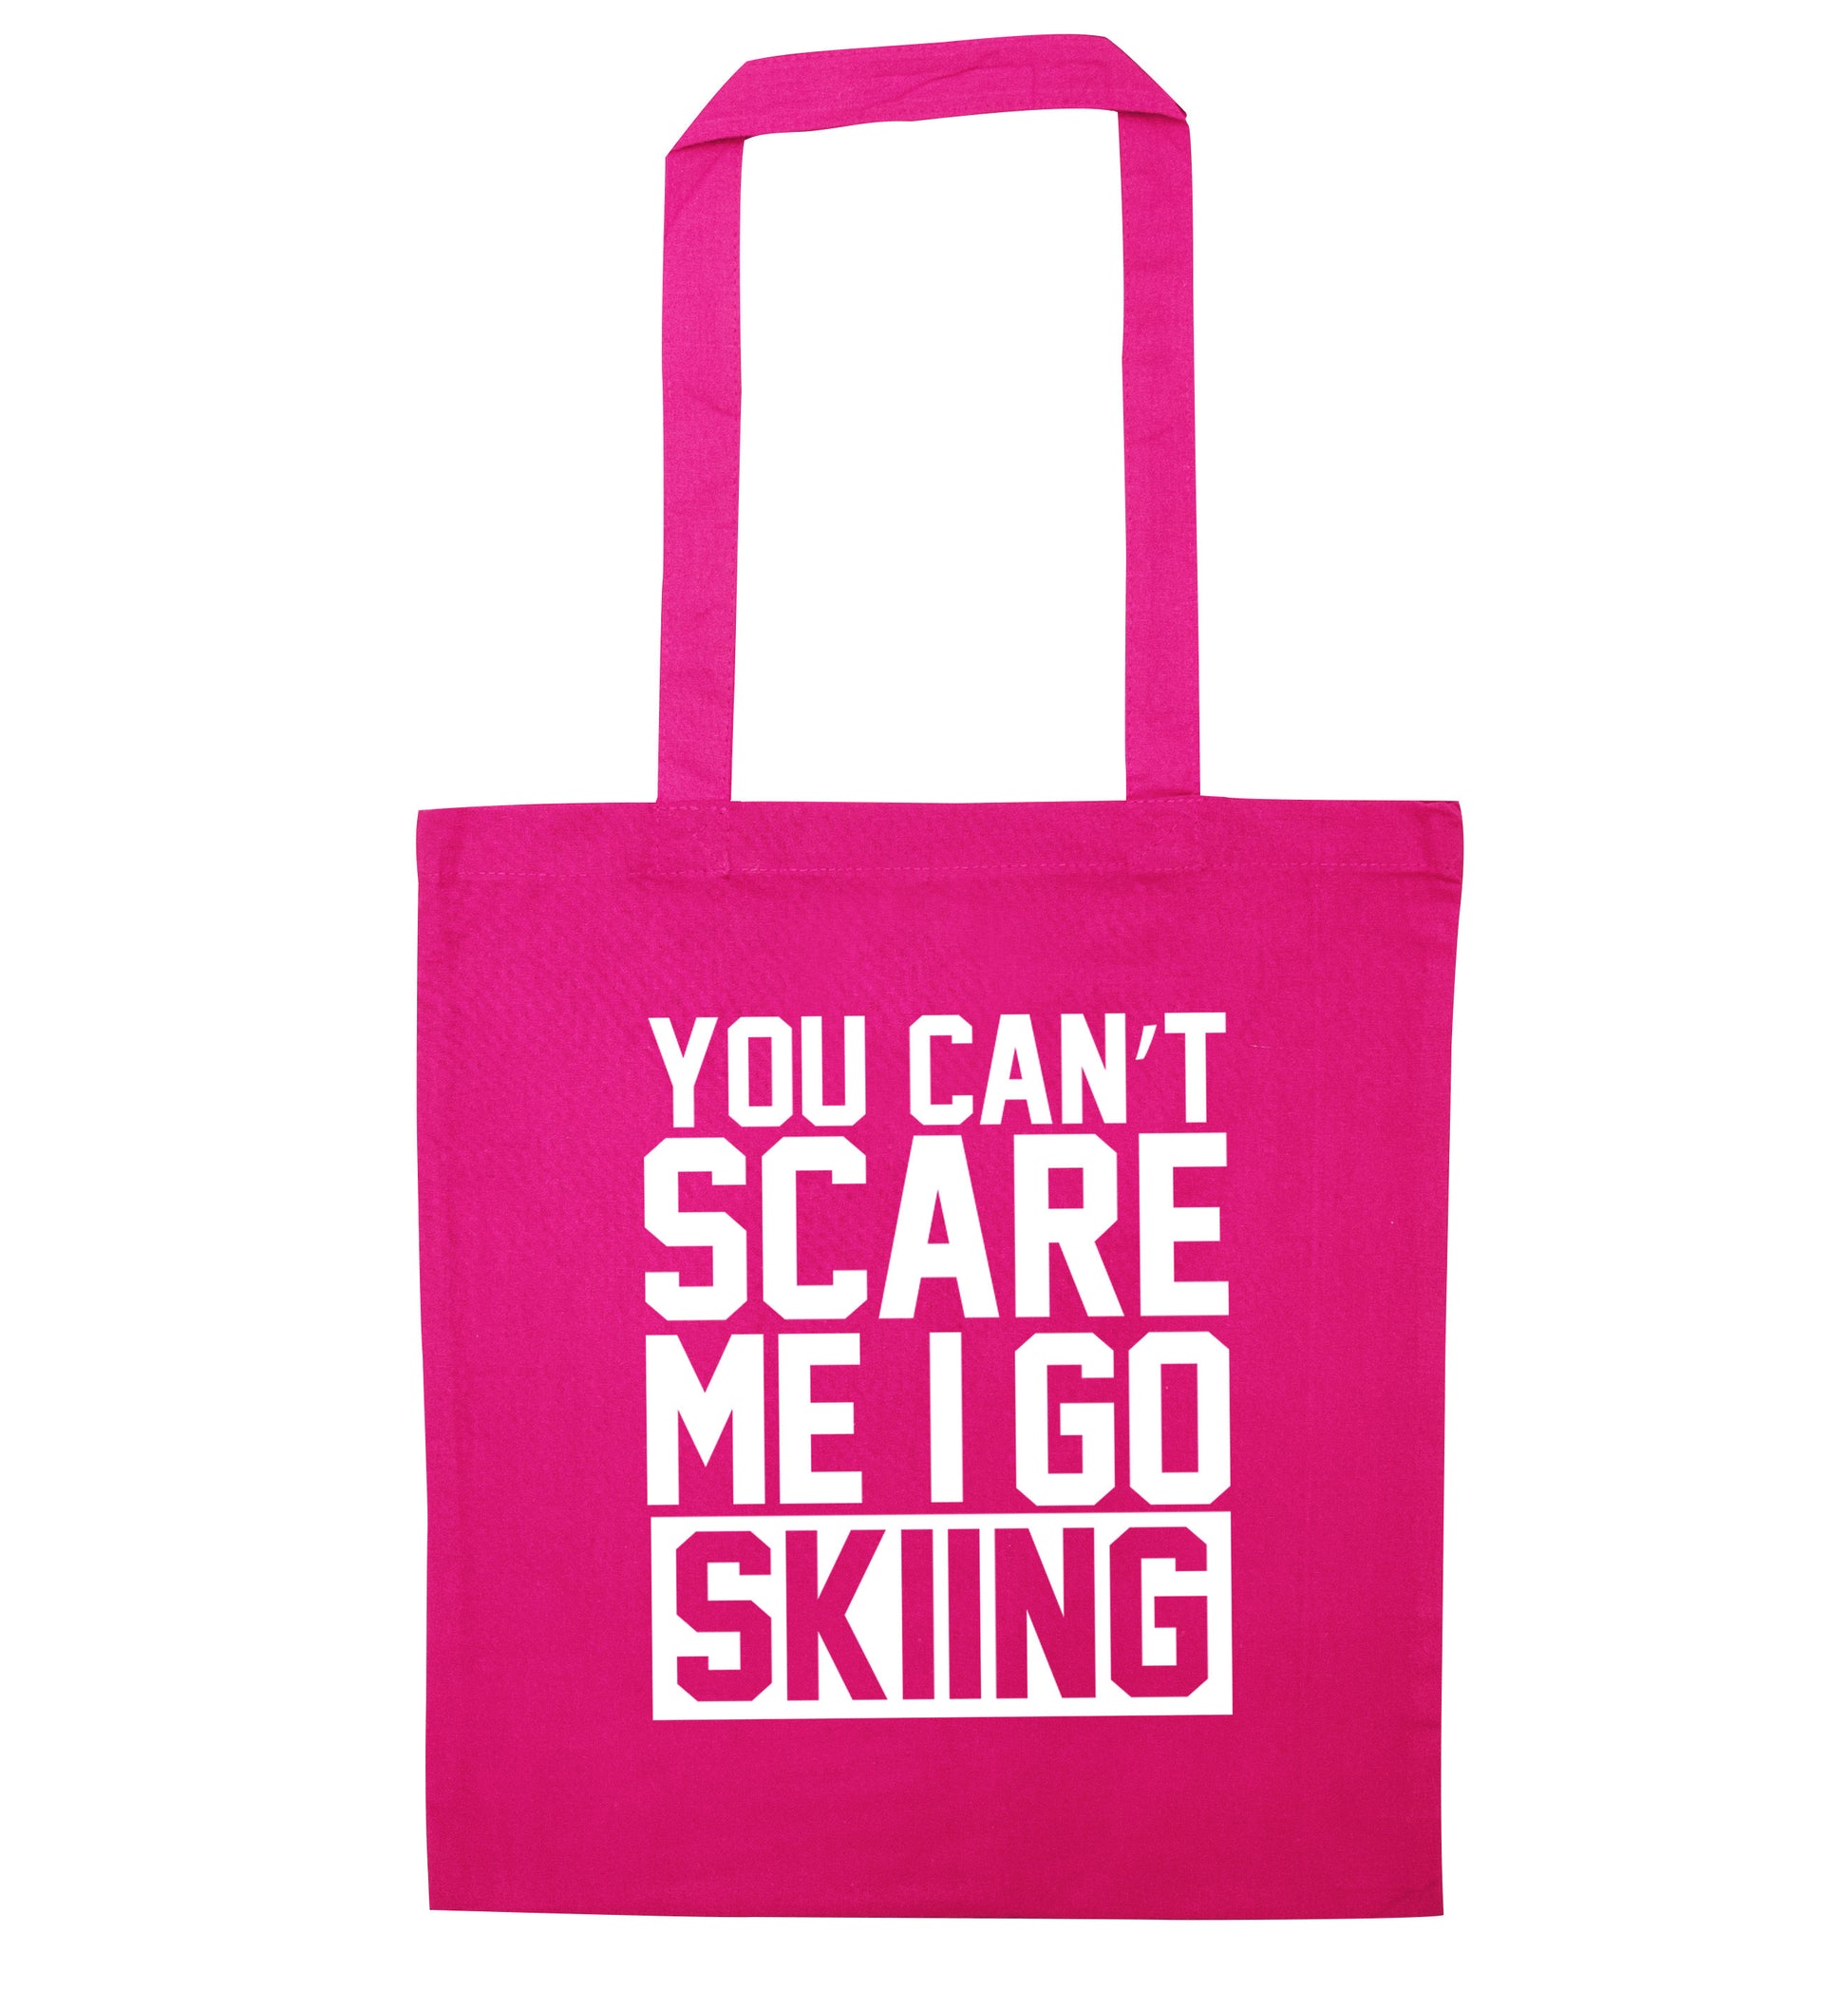 You can't scare me I go skiing pink tote bag